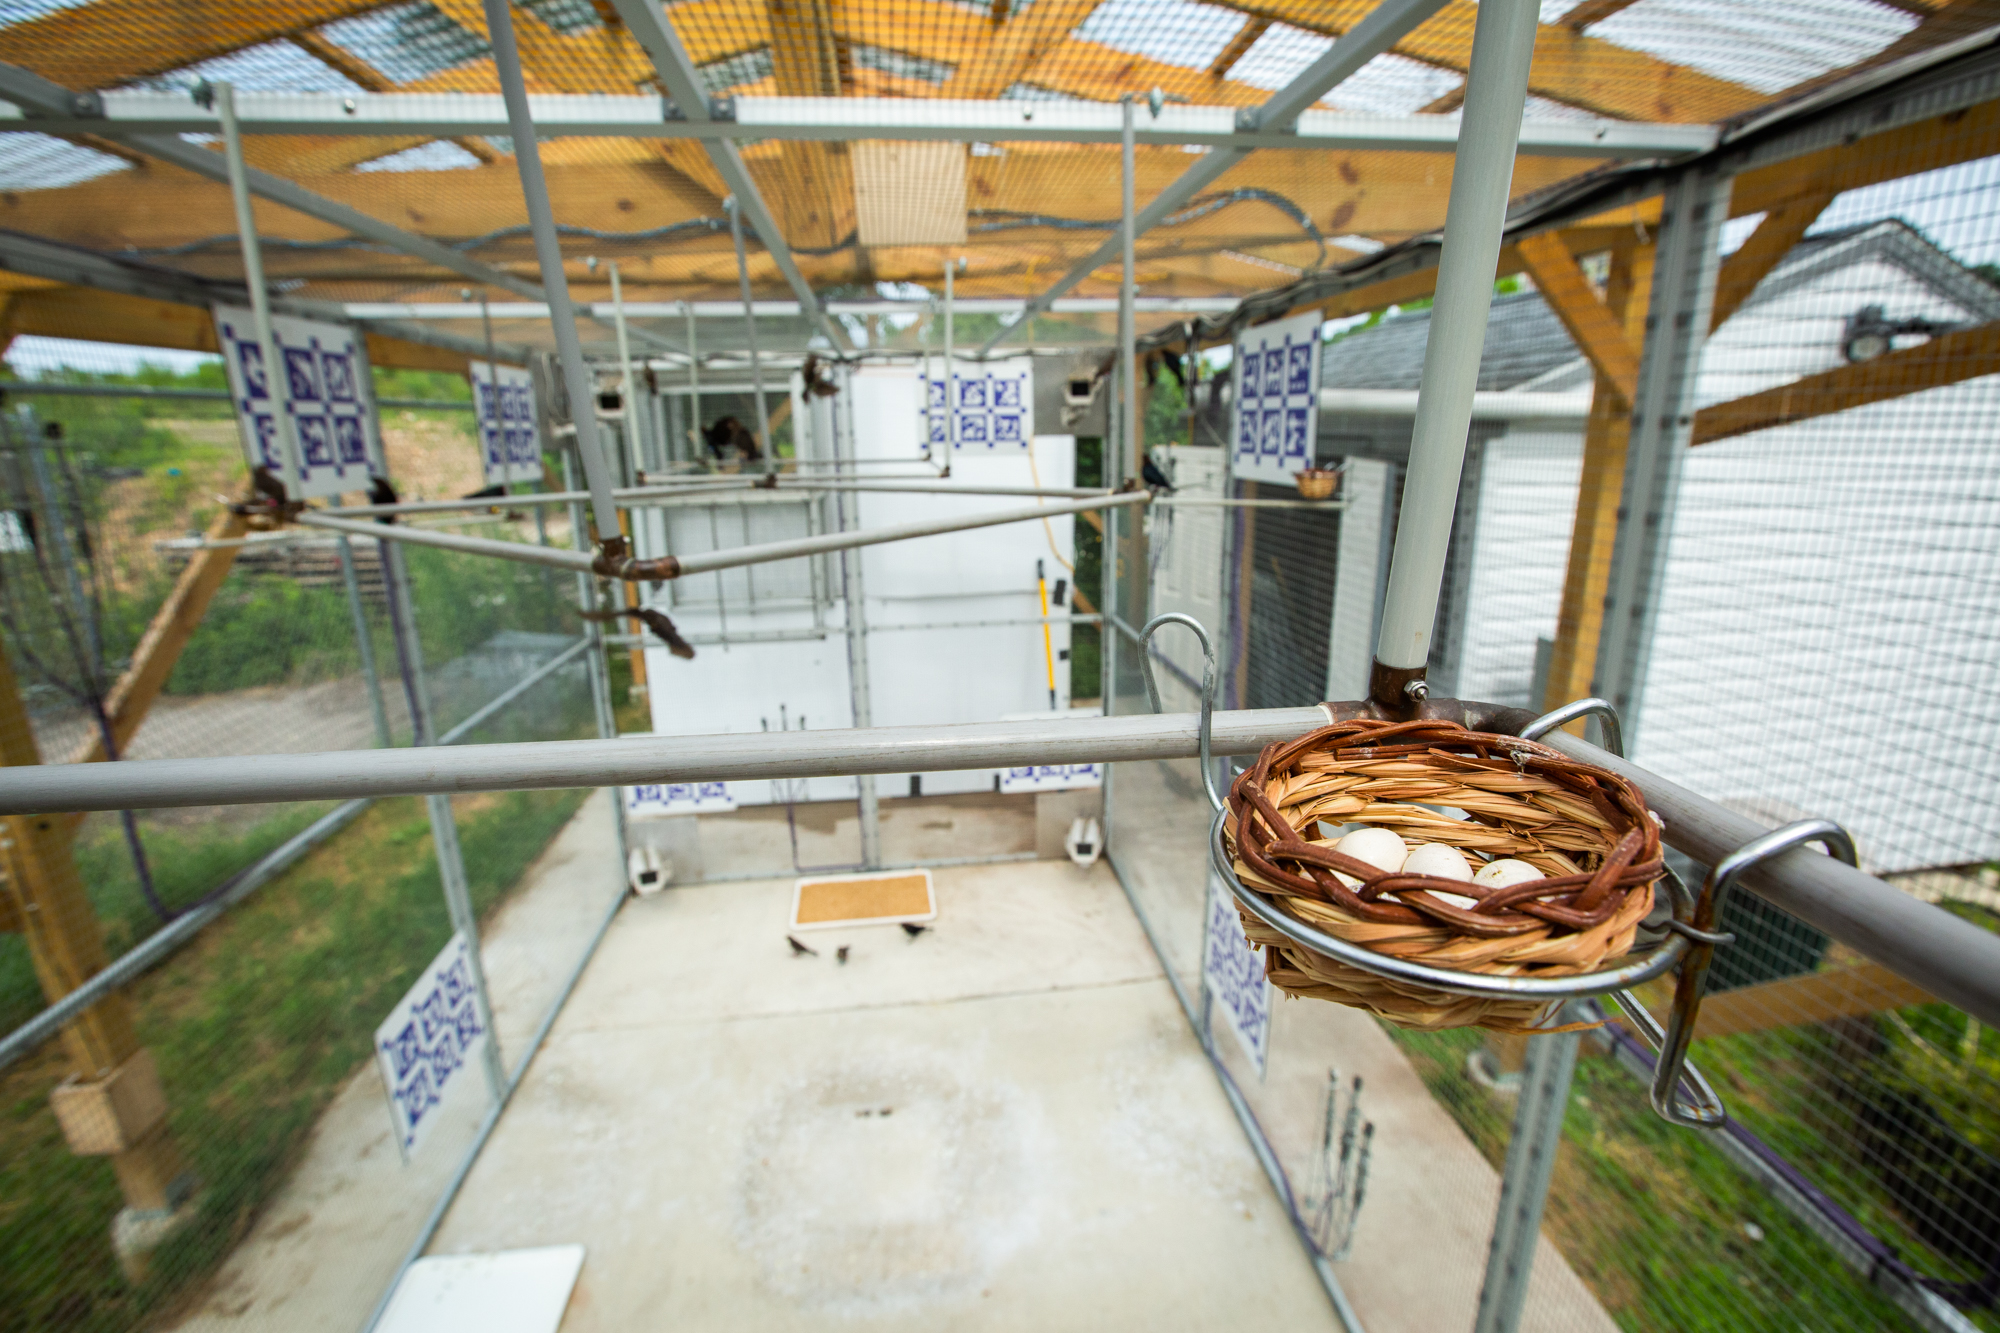 inside the smart aviary showing nests